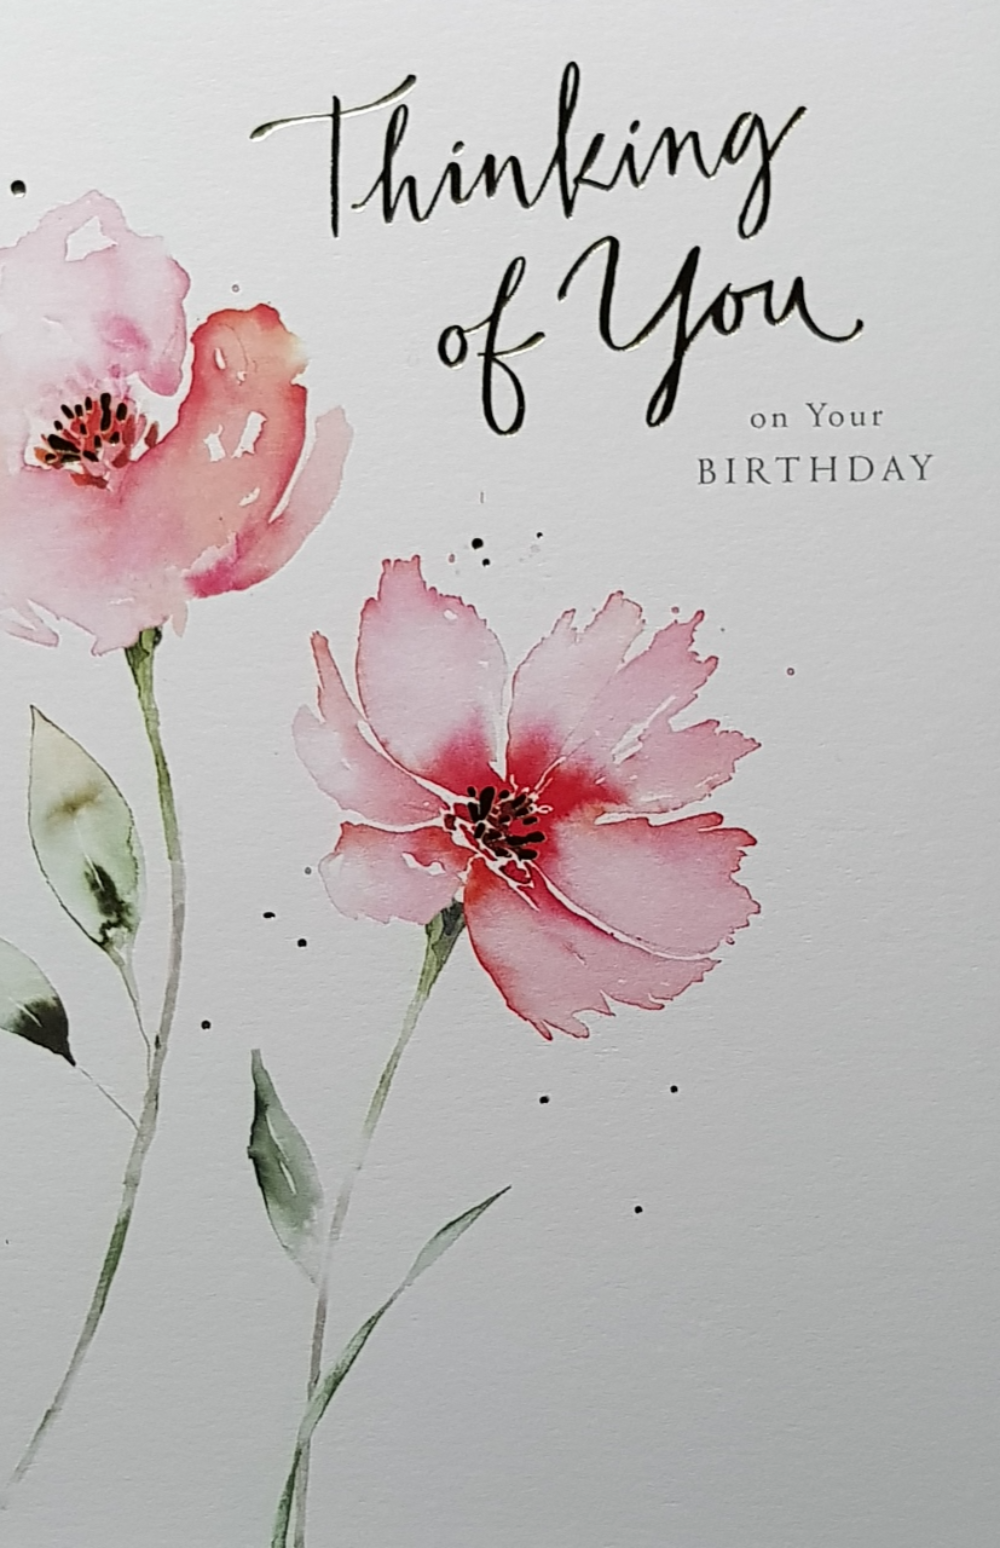 Birthday Card - Thinking Of You / Two Beautiful Flowers On A White Front